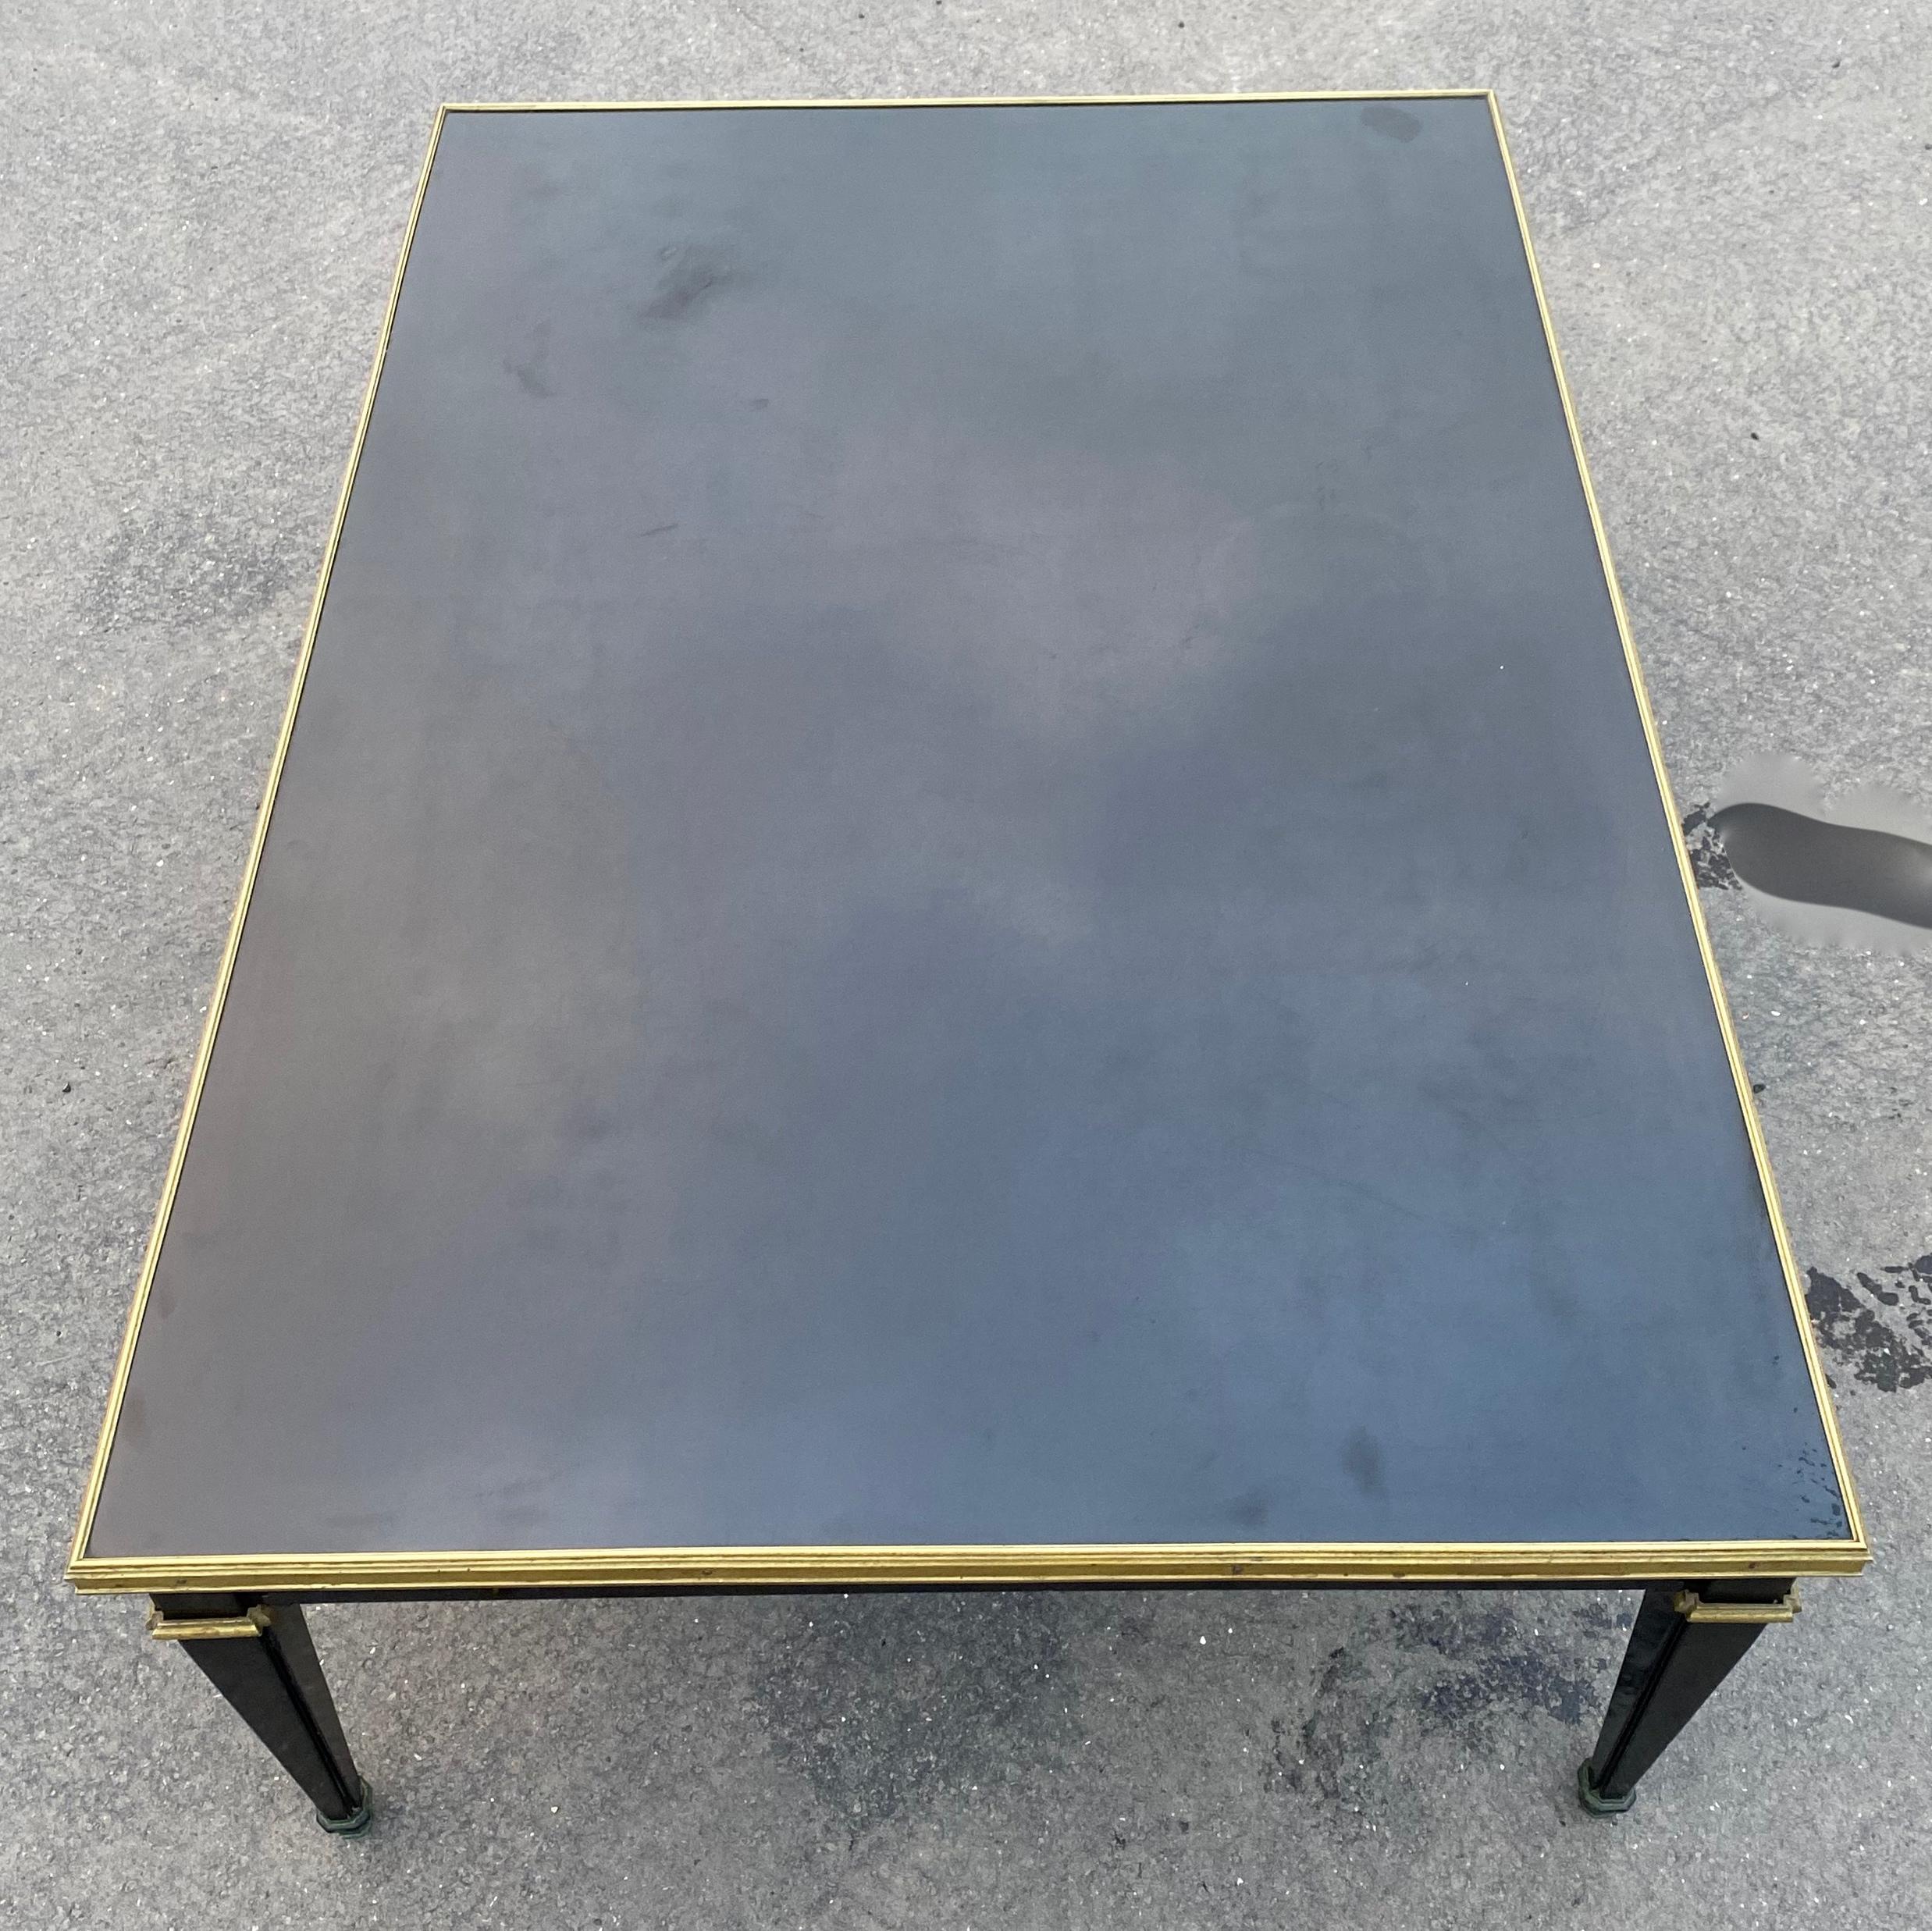 1950/70 Coffee Table Wood Lacquered Black Maison Jansen 120 x 80 cm
Maison Jansen coffee table lacquered wood and gilded bronze ornaments, directoire style, circa 1950/70,by Gerard MILLE
Condition of use 
Come from LAZARD Bank 
Length: 120 cm
Width: